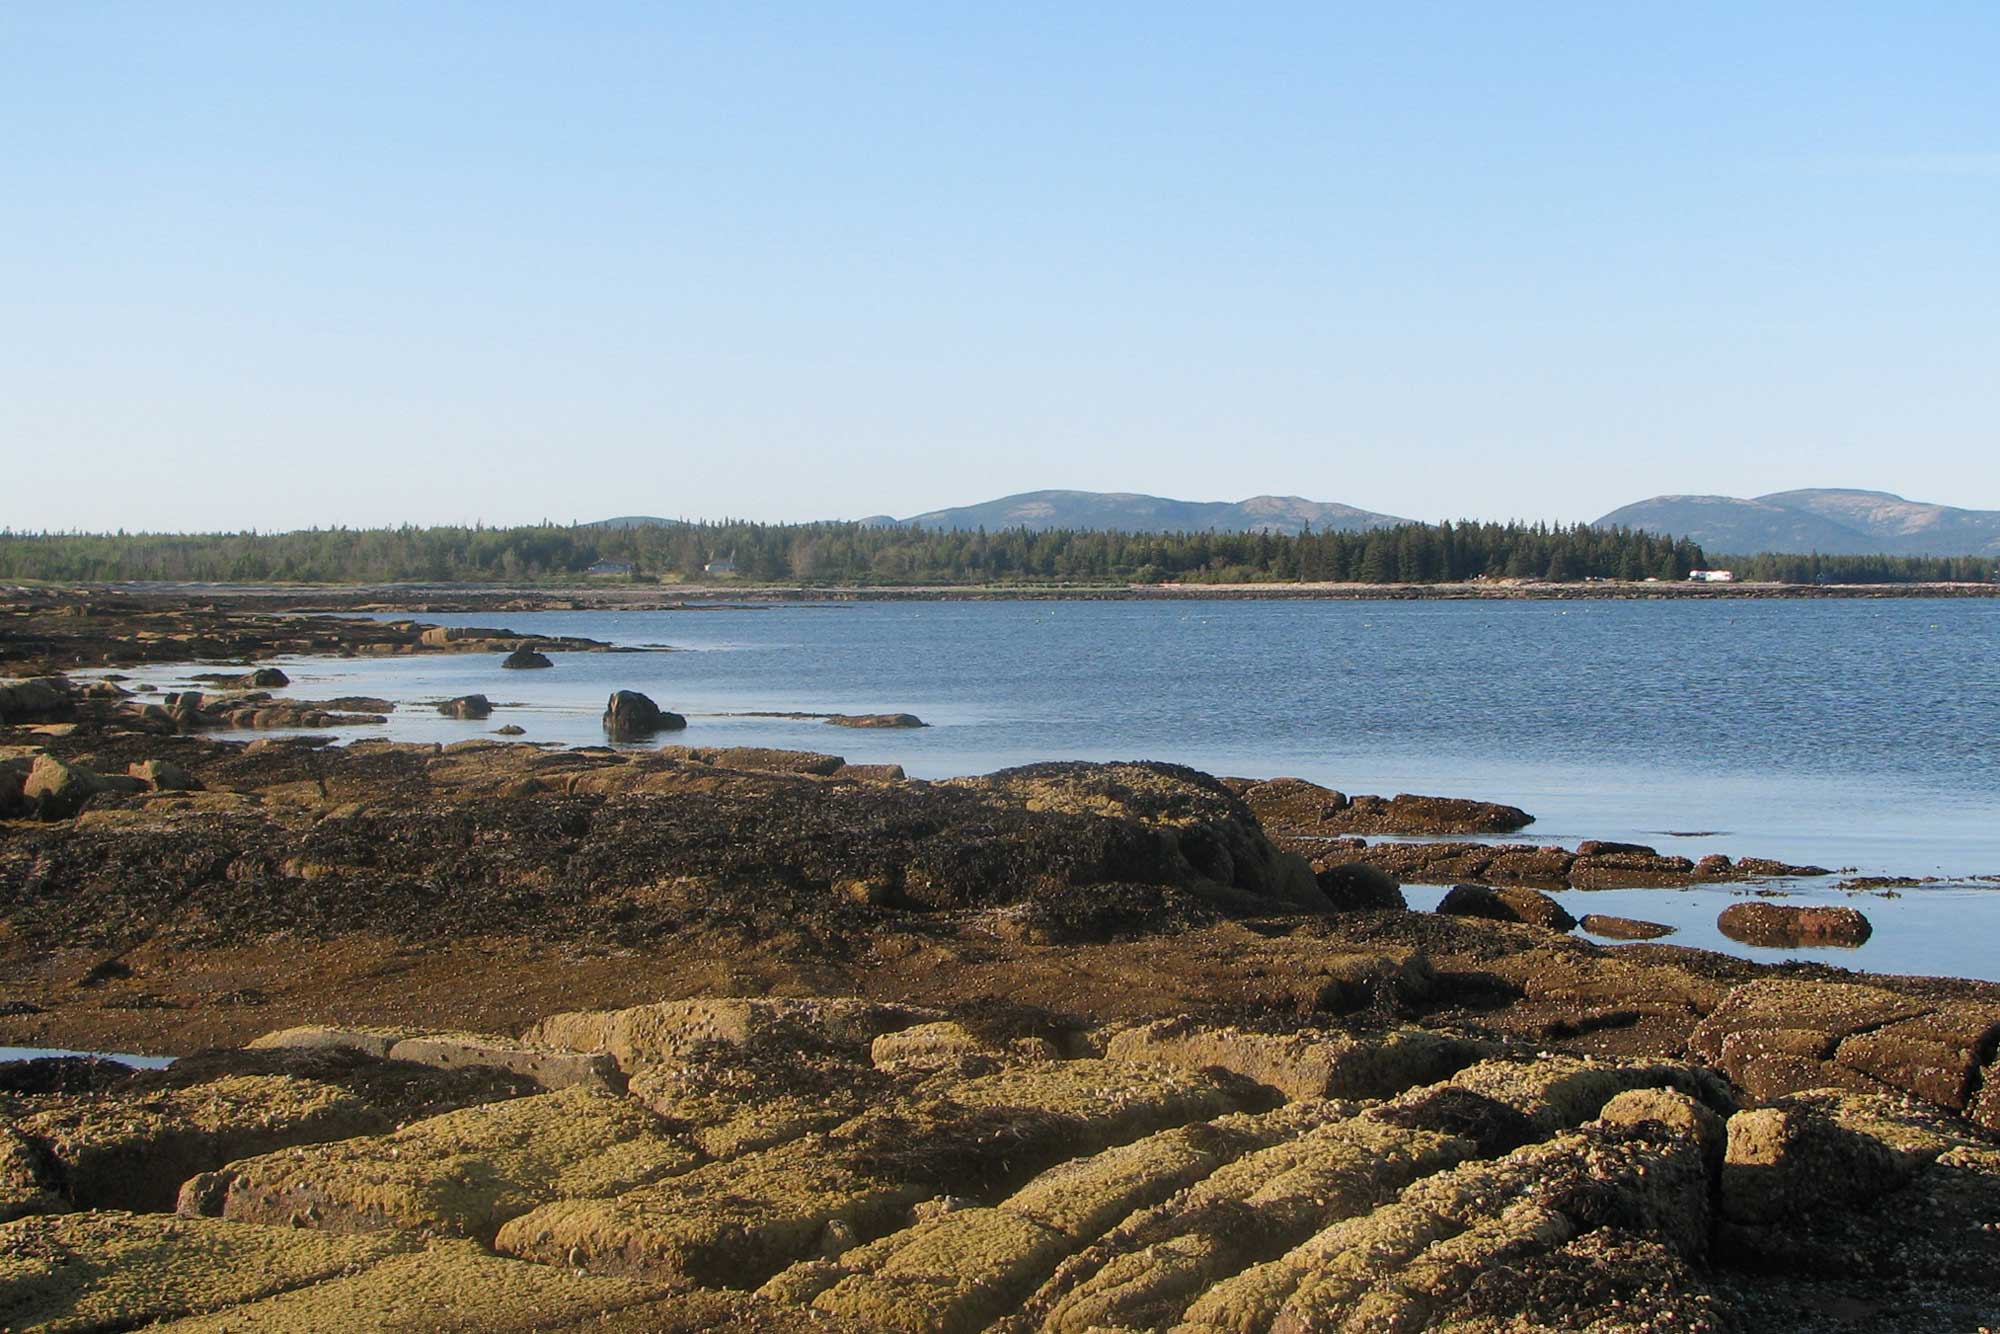 Photograph of a rocky shoreline at Acadia National Park in Maine.